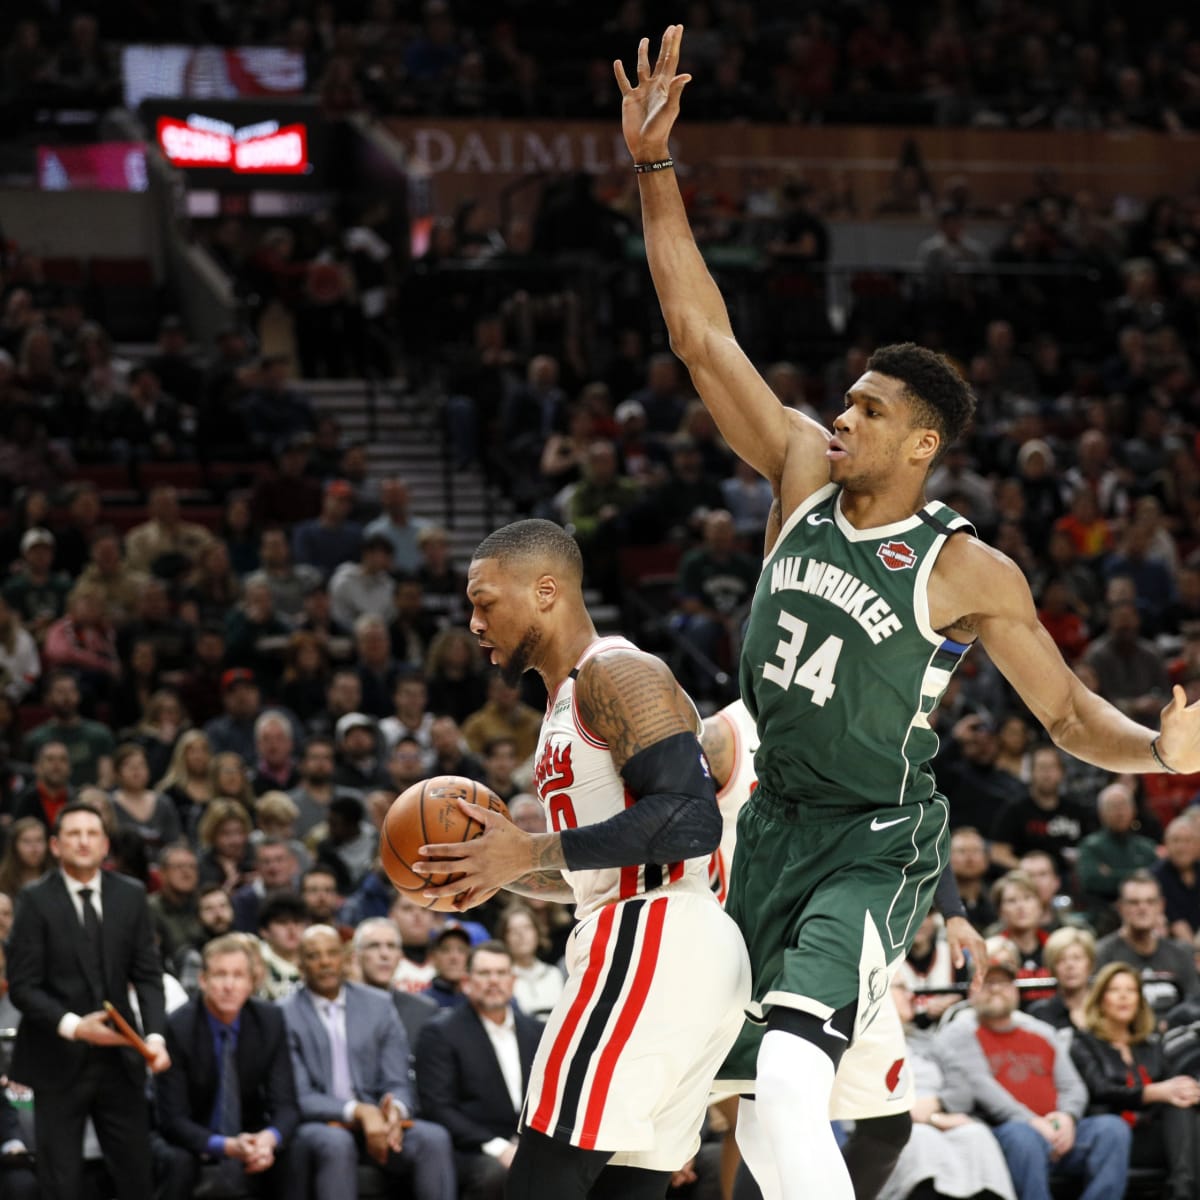 When can the Chicago Bulls pursue Giannis in free agency?